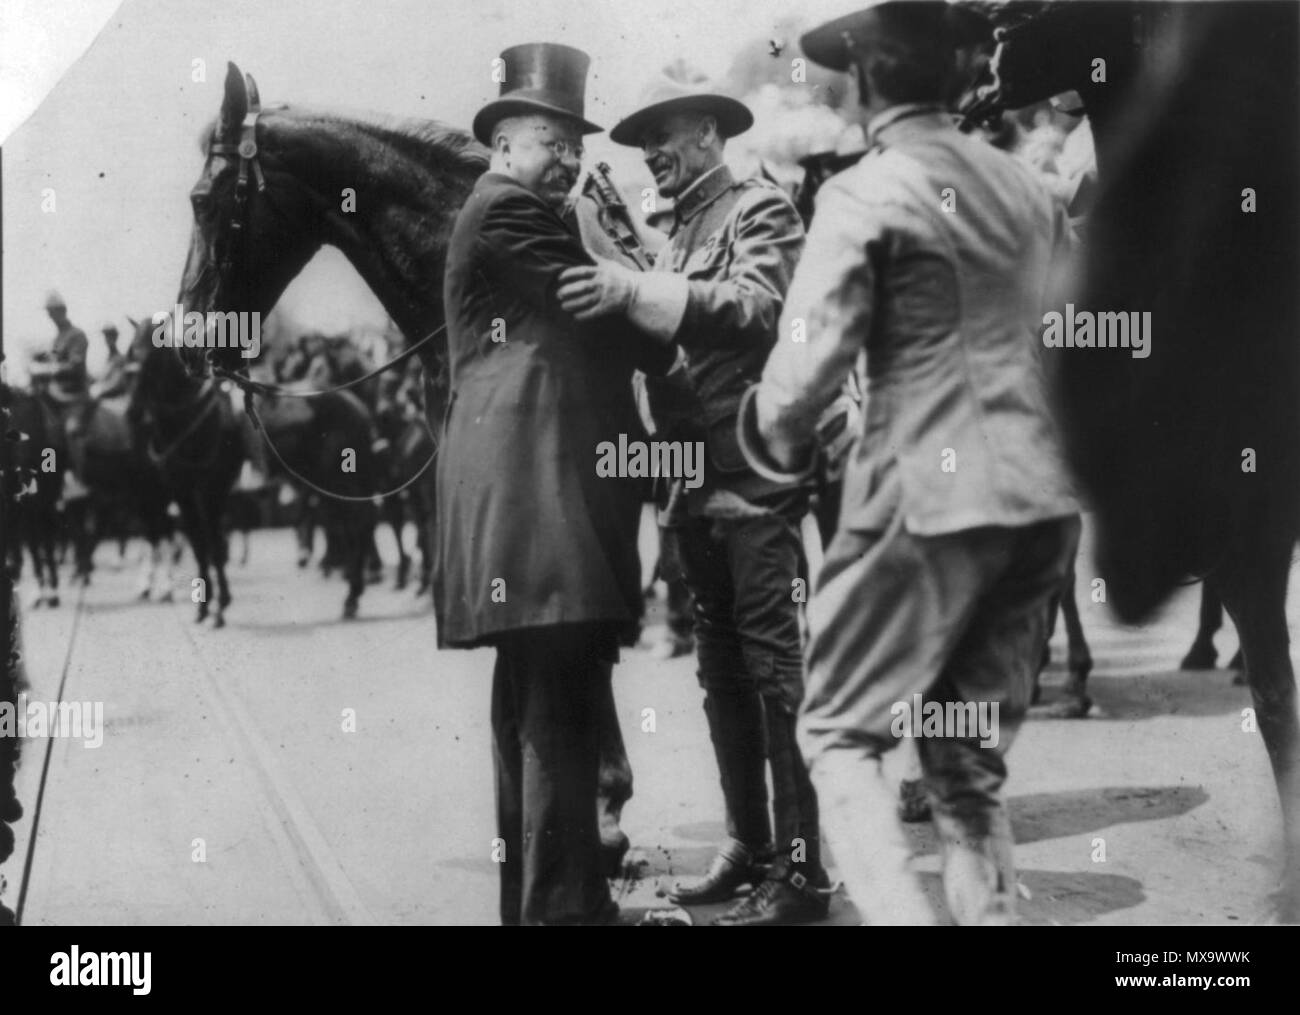 . English: Photograph showing Theodore Roosevelt and Col. Alexander O. Brodie, in uniform, greeting each other, surrounded by horses. circa 1910 June 23. Paul Thompson (photographer) 254 Greeting Col. Brodie of Rough Riders Stock Photo